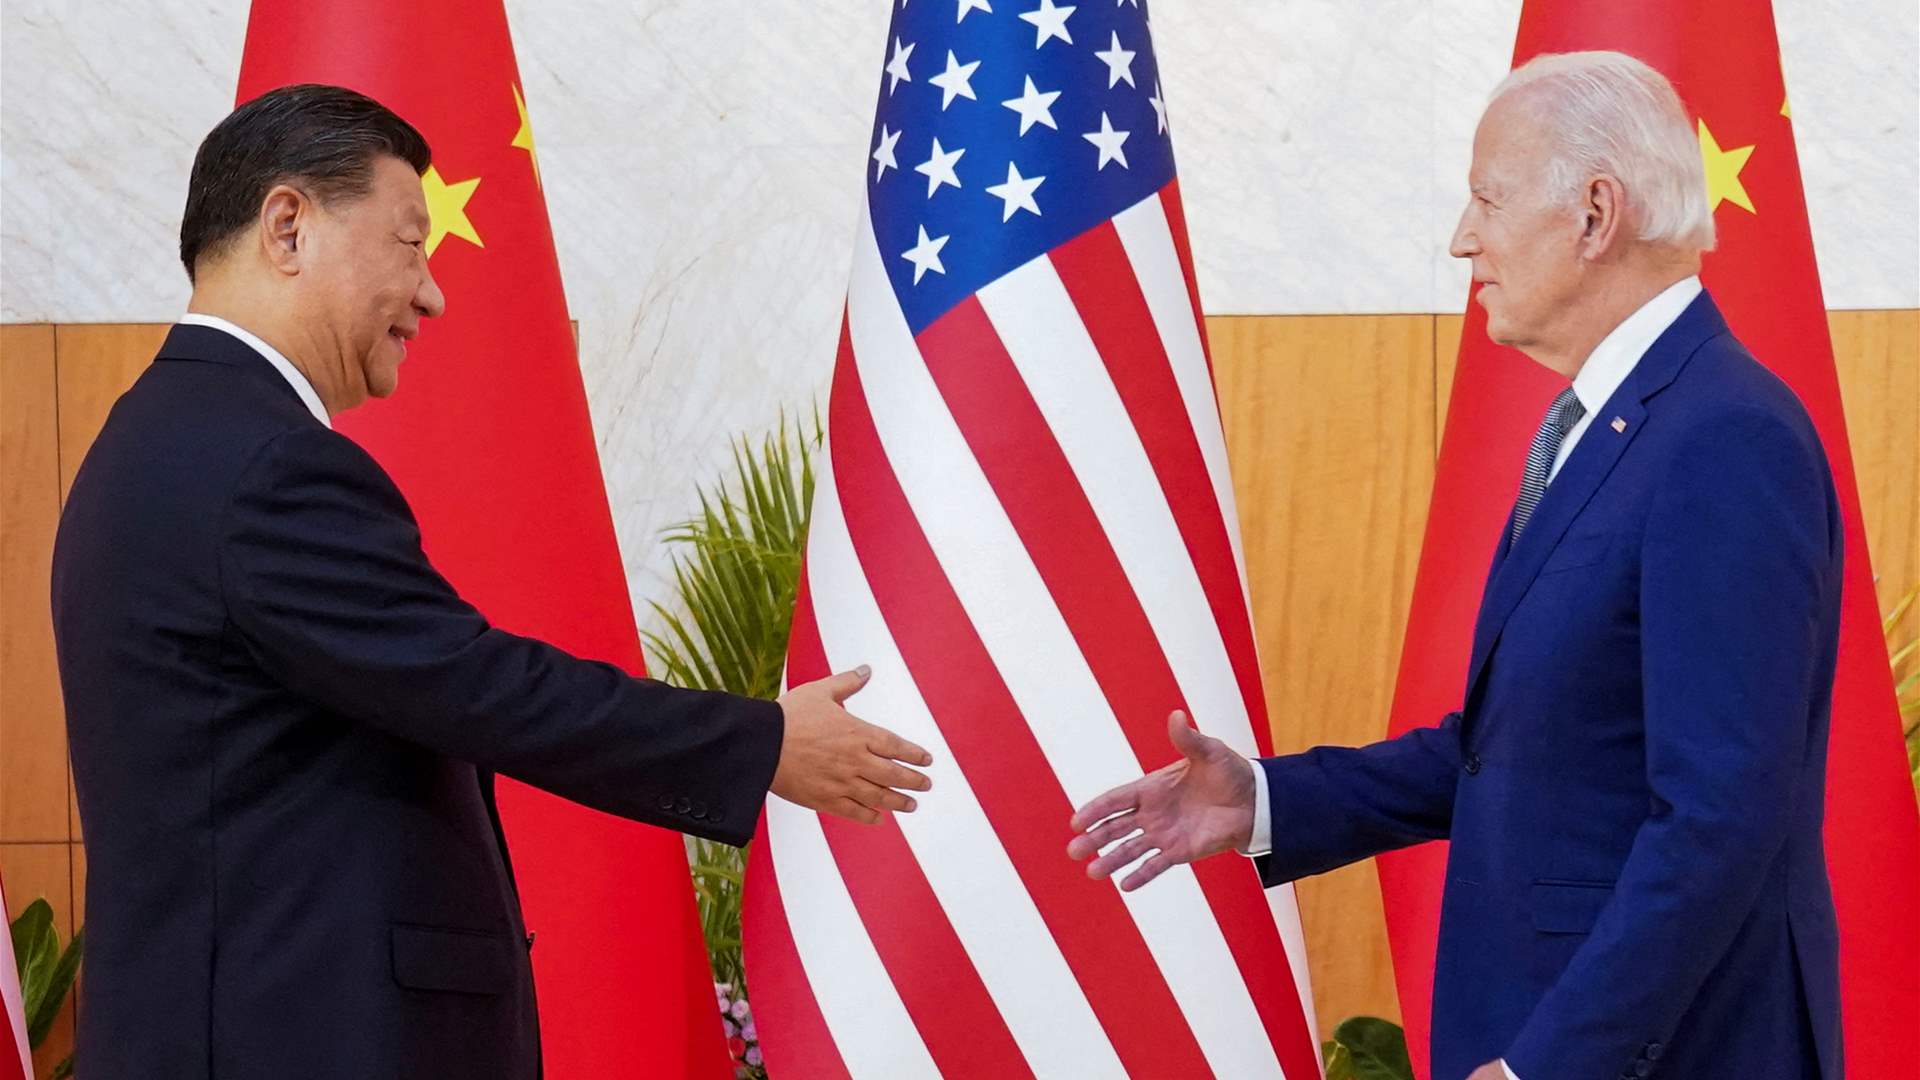 Biden confirms that Washington is not trying to decouple from China